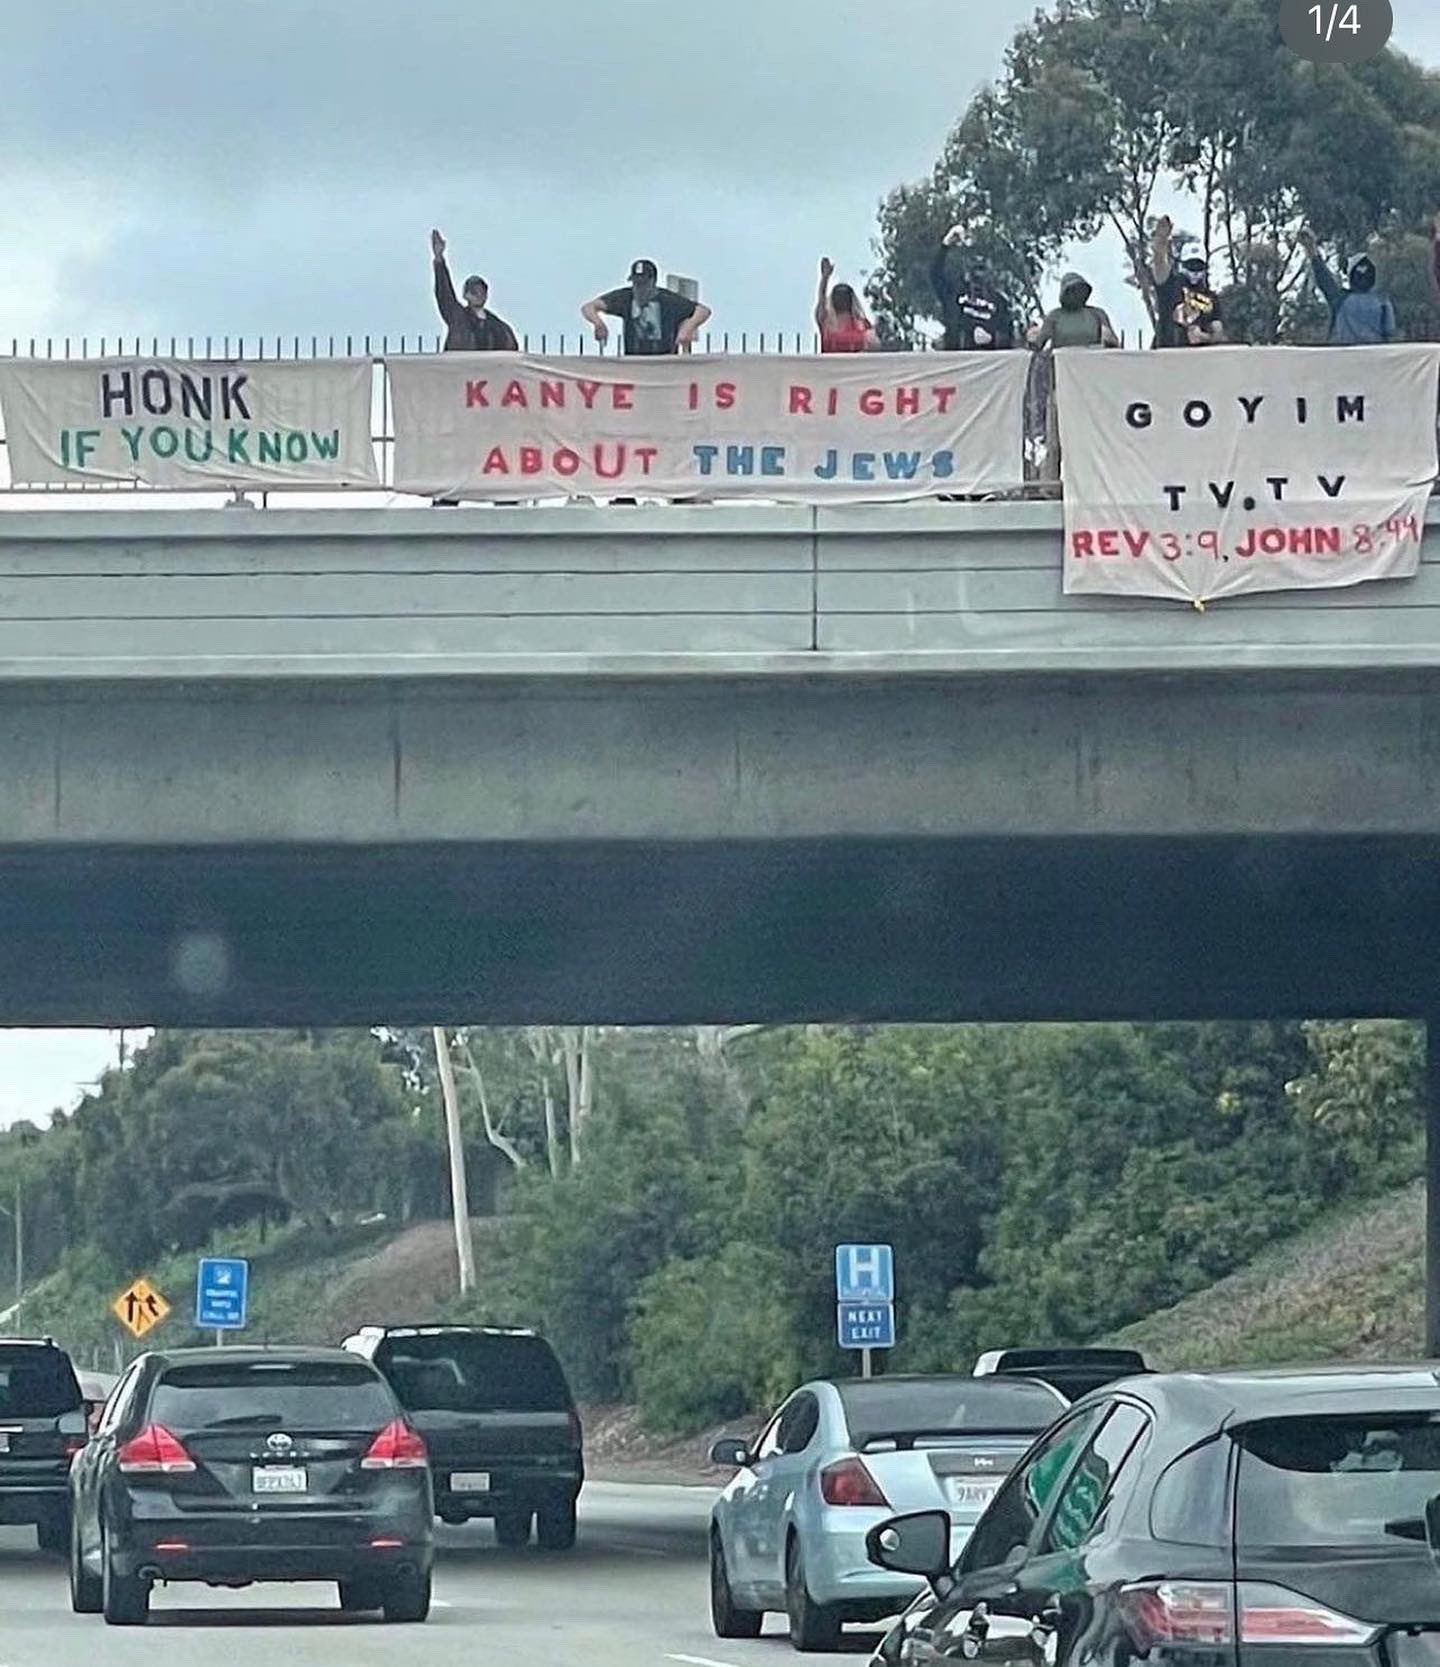 A gathering that occurred over the 405 in Los Angeles. Twitter: Sam Yerbi